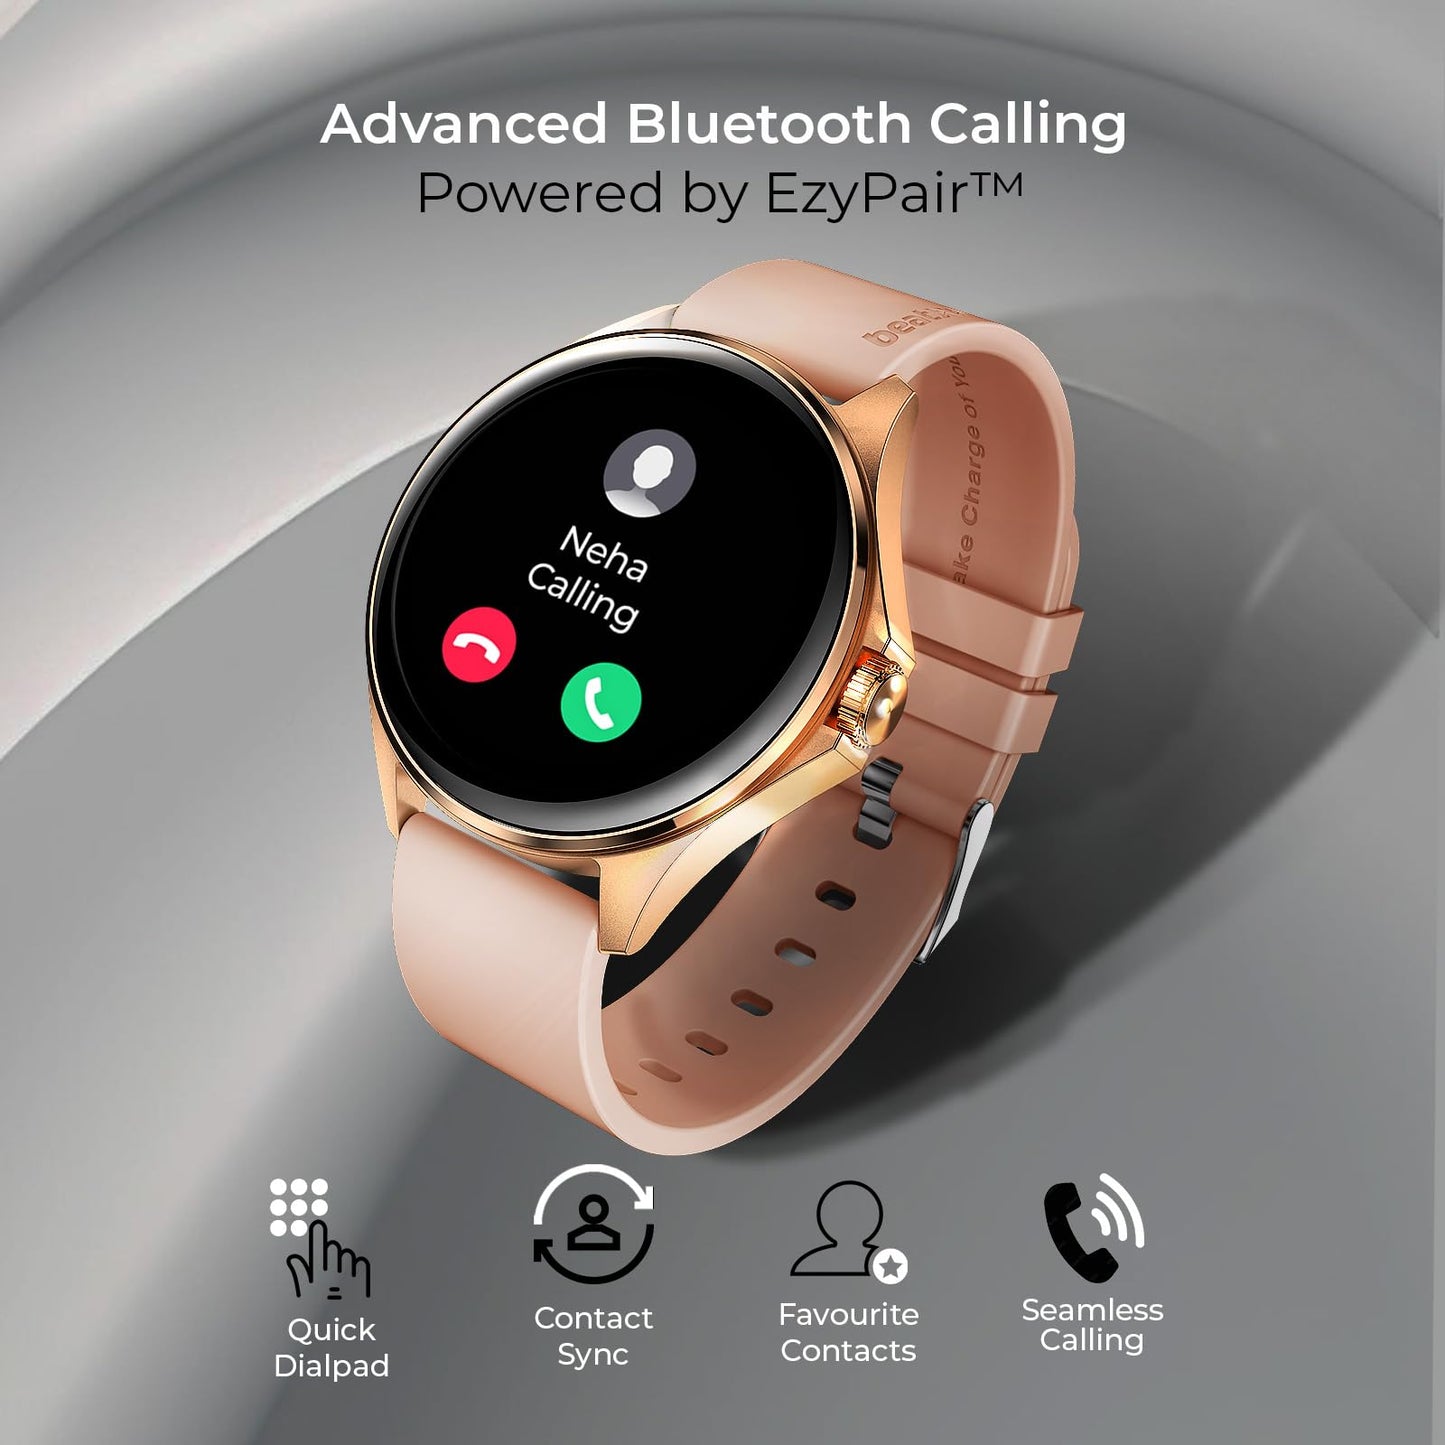 beatXP Nuke 1.32” Super AMOLED Display Bluetooth Calling Smart Watch, 466 * 466px, Metal Body, 500 Nits, 60Hz Refresh Rate, 100+ Sports Modes, 24/7 Health Tracking, IP67 (Champagne Gold)